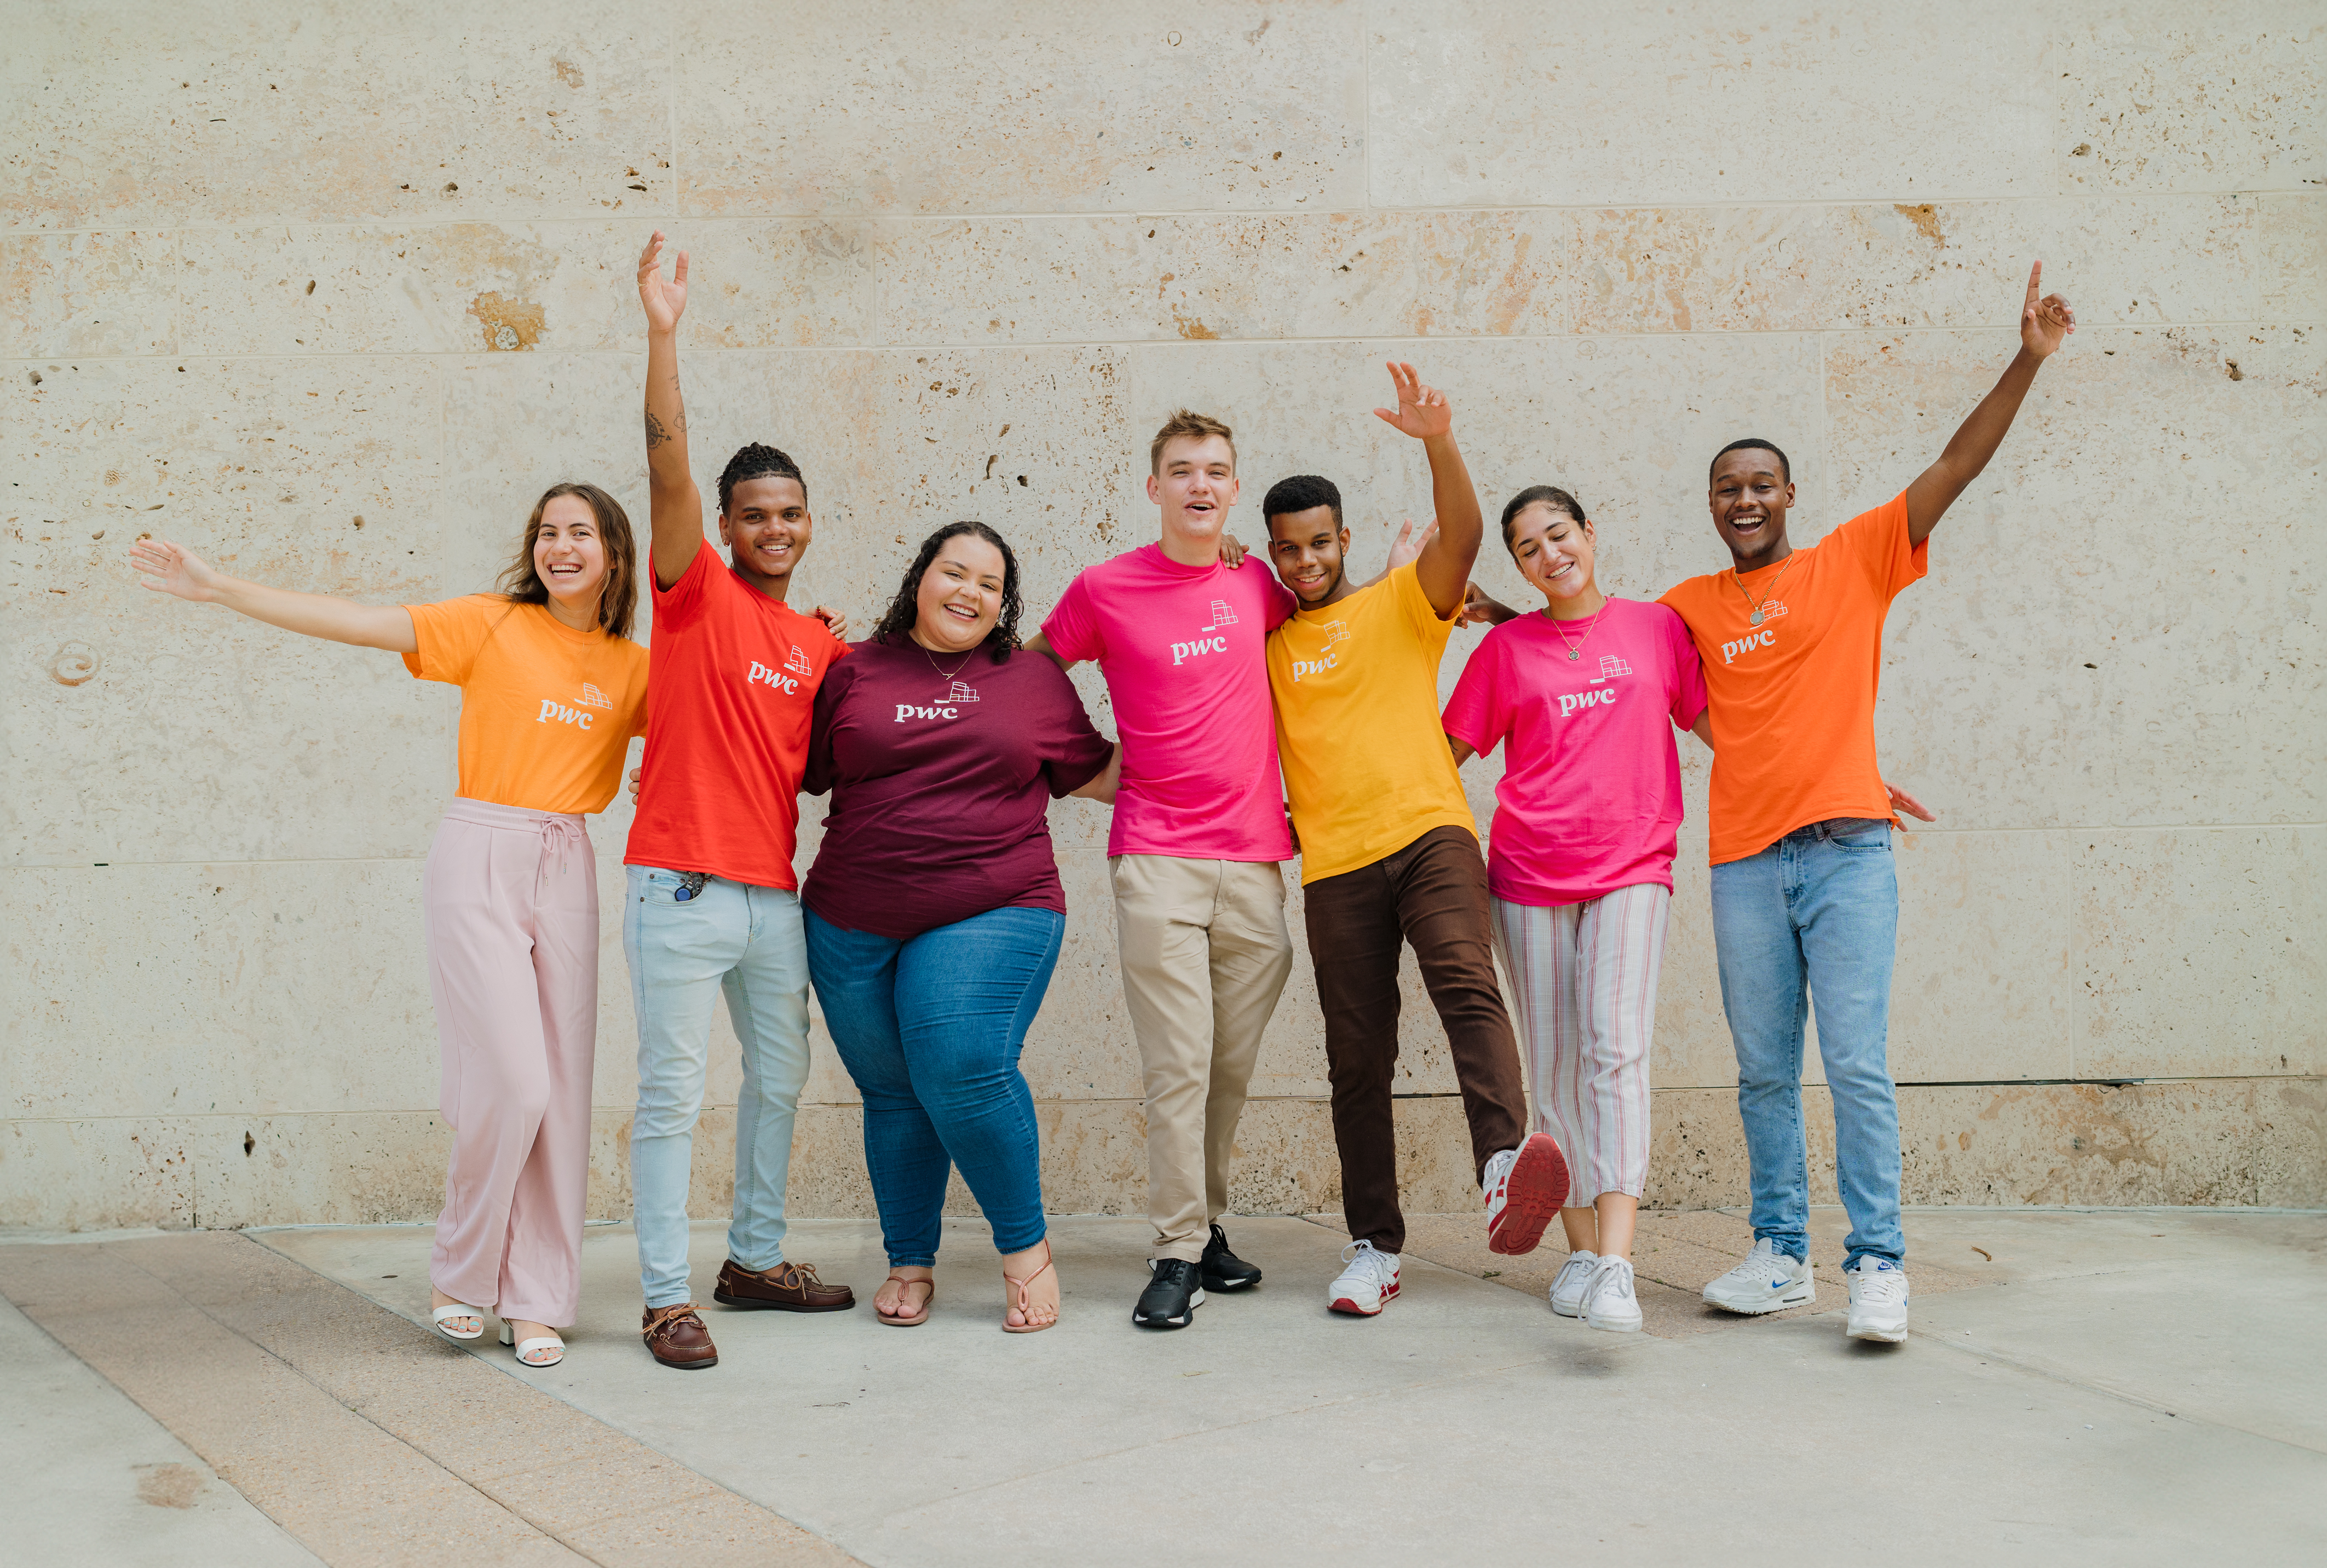 Group shot of young adults in colourful shirts